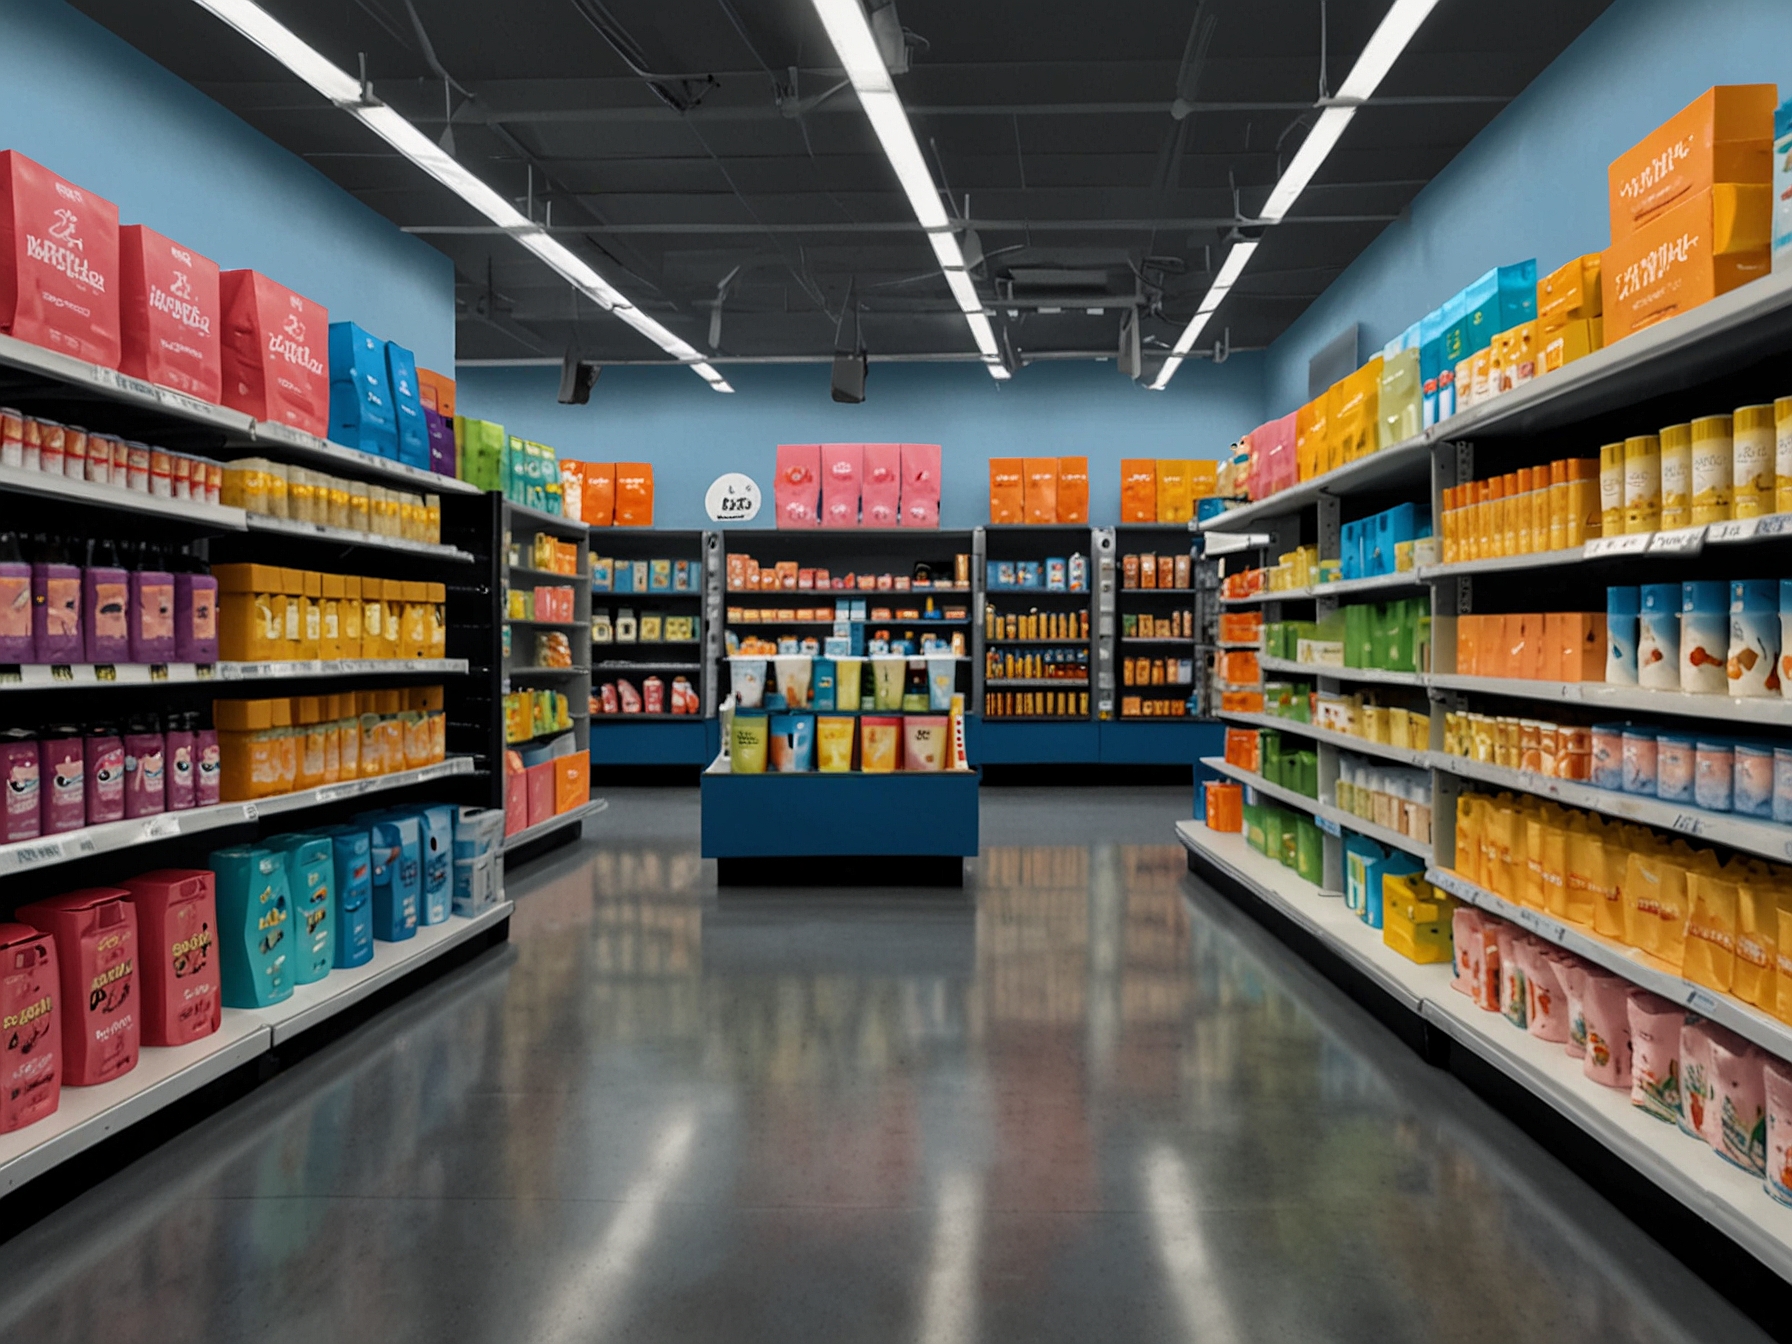 A vibrant Walmart store aisle showcasing the new Charlotte's Web CBD topical products, including balm sticks, creams, and cooling gels, with clear labeling of ingredients and benefits.